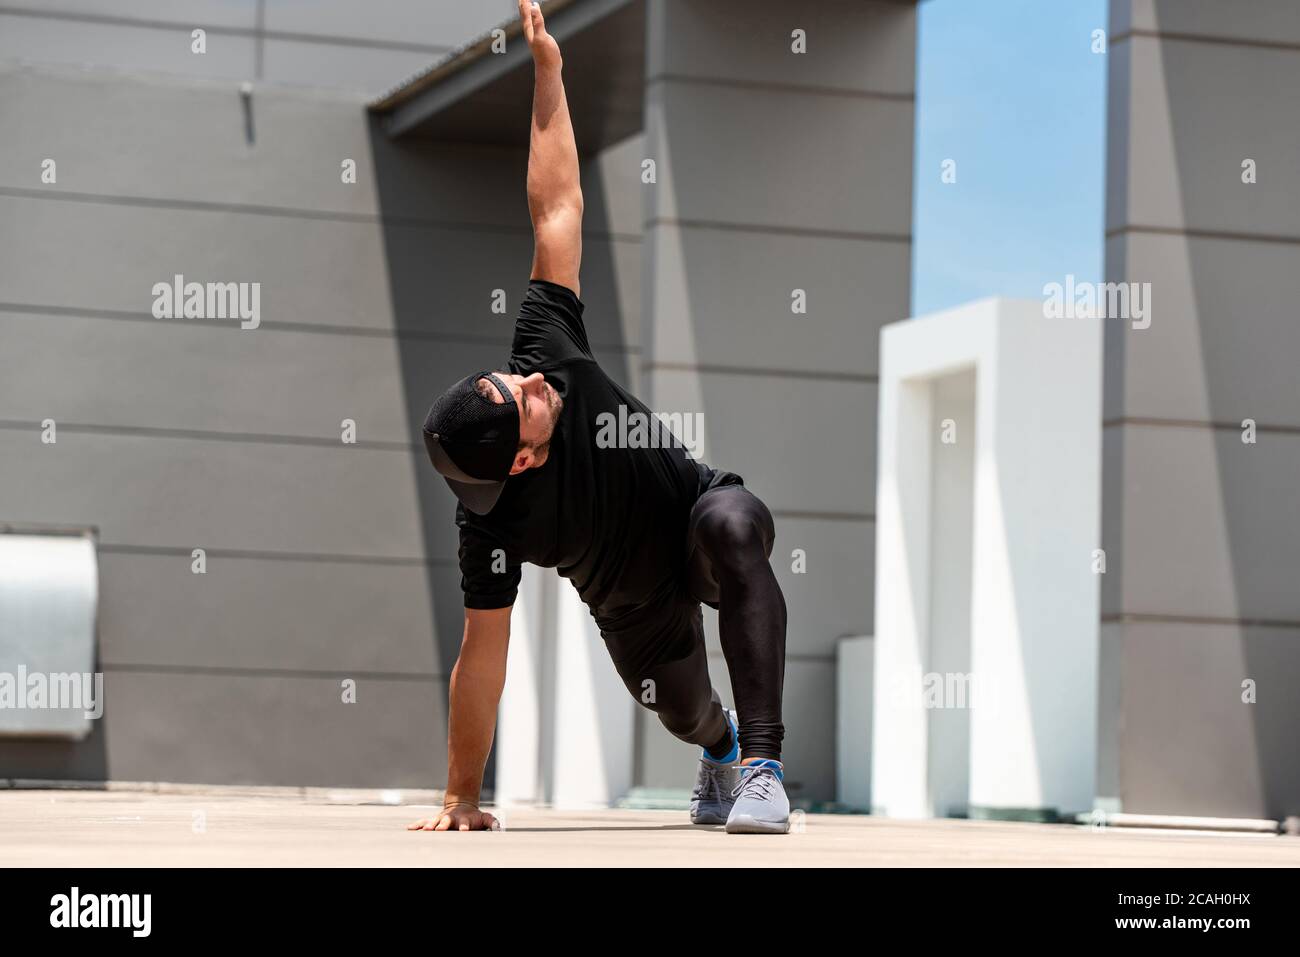 Fit sports man warming up with spider lunge exercise outdoors on building rooftop floor Stock Photo